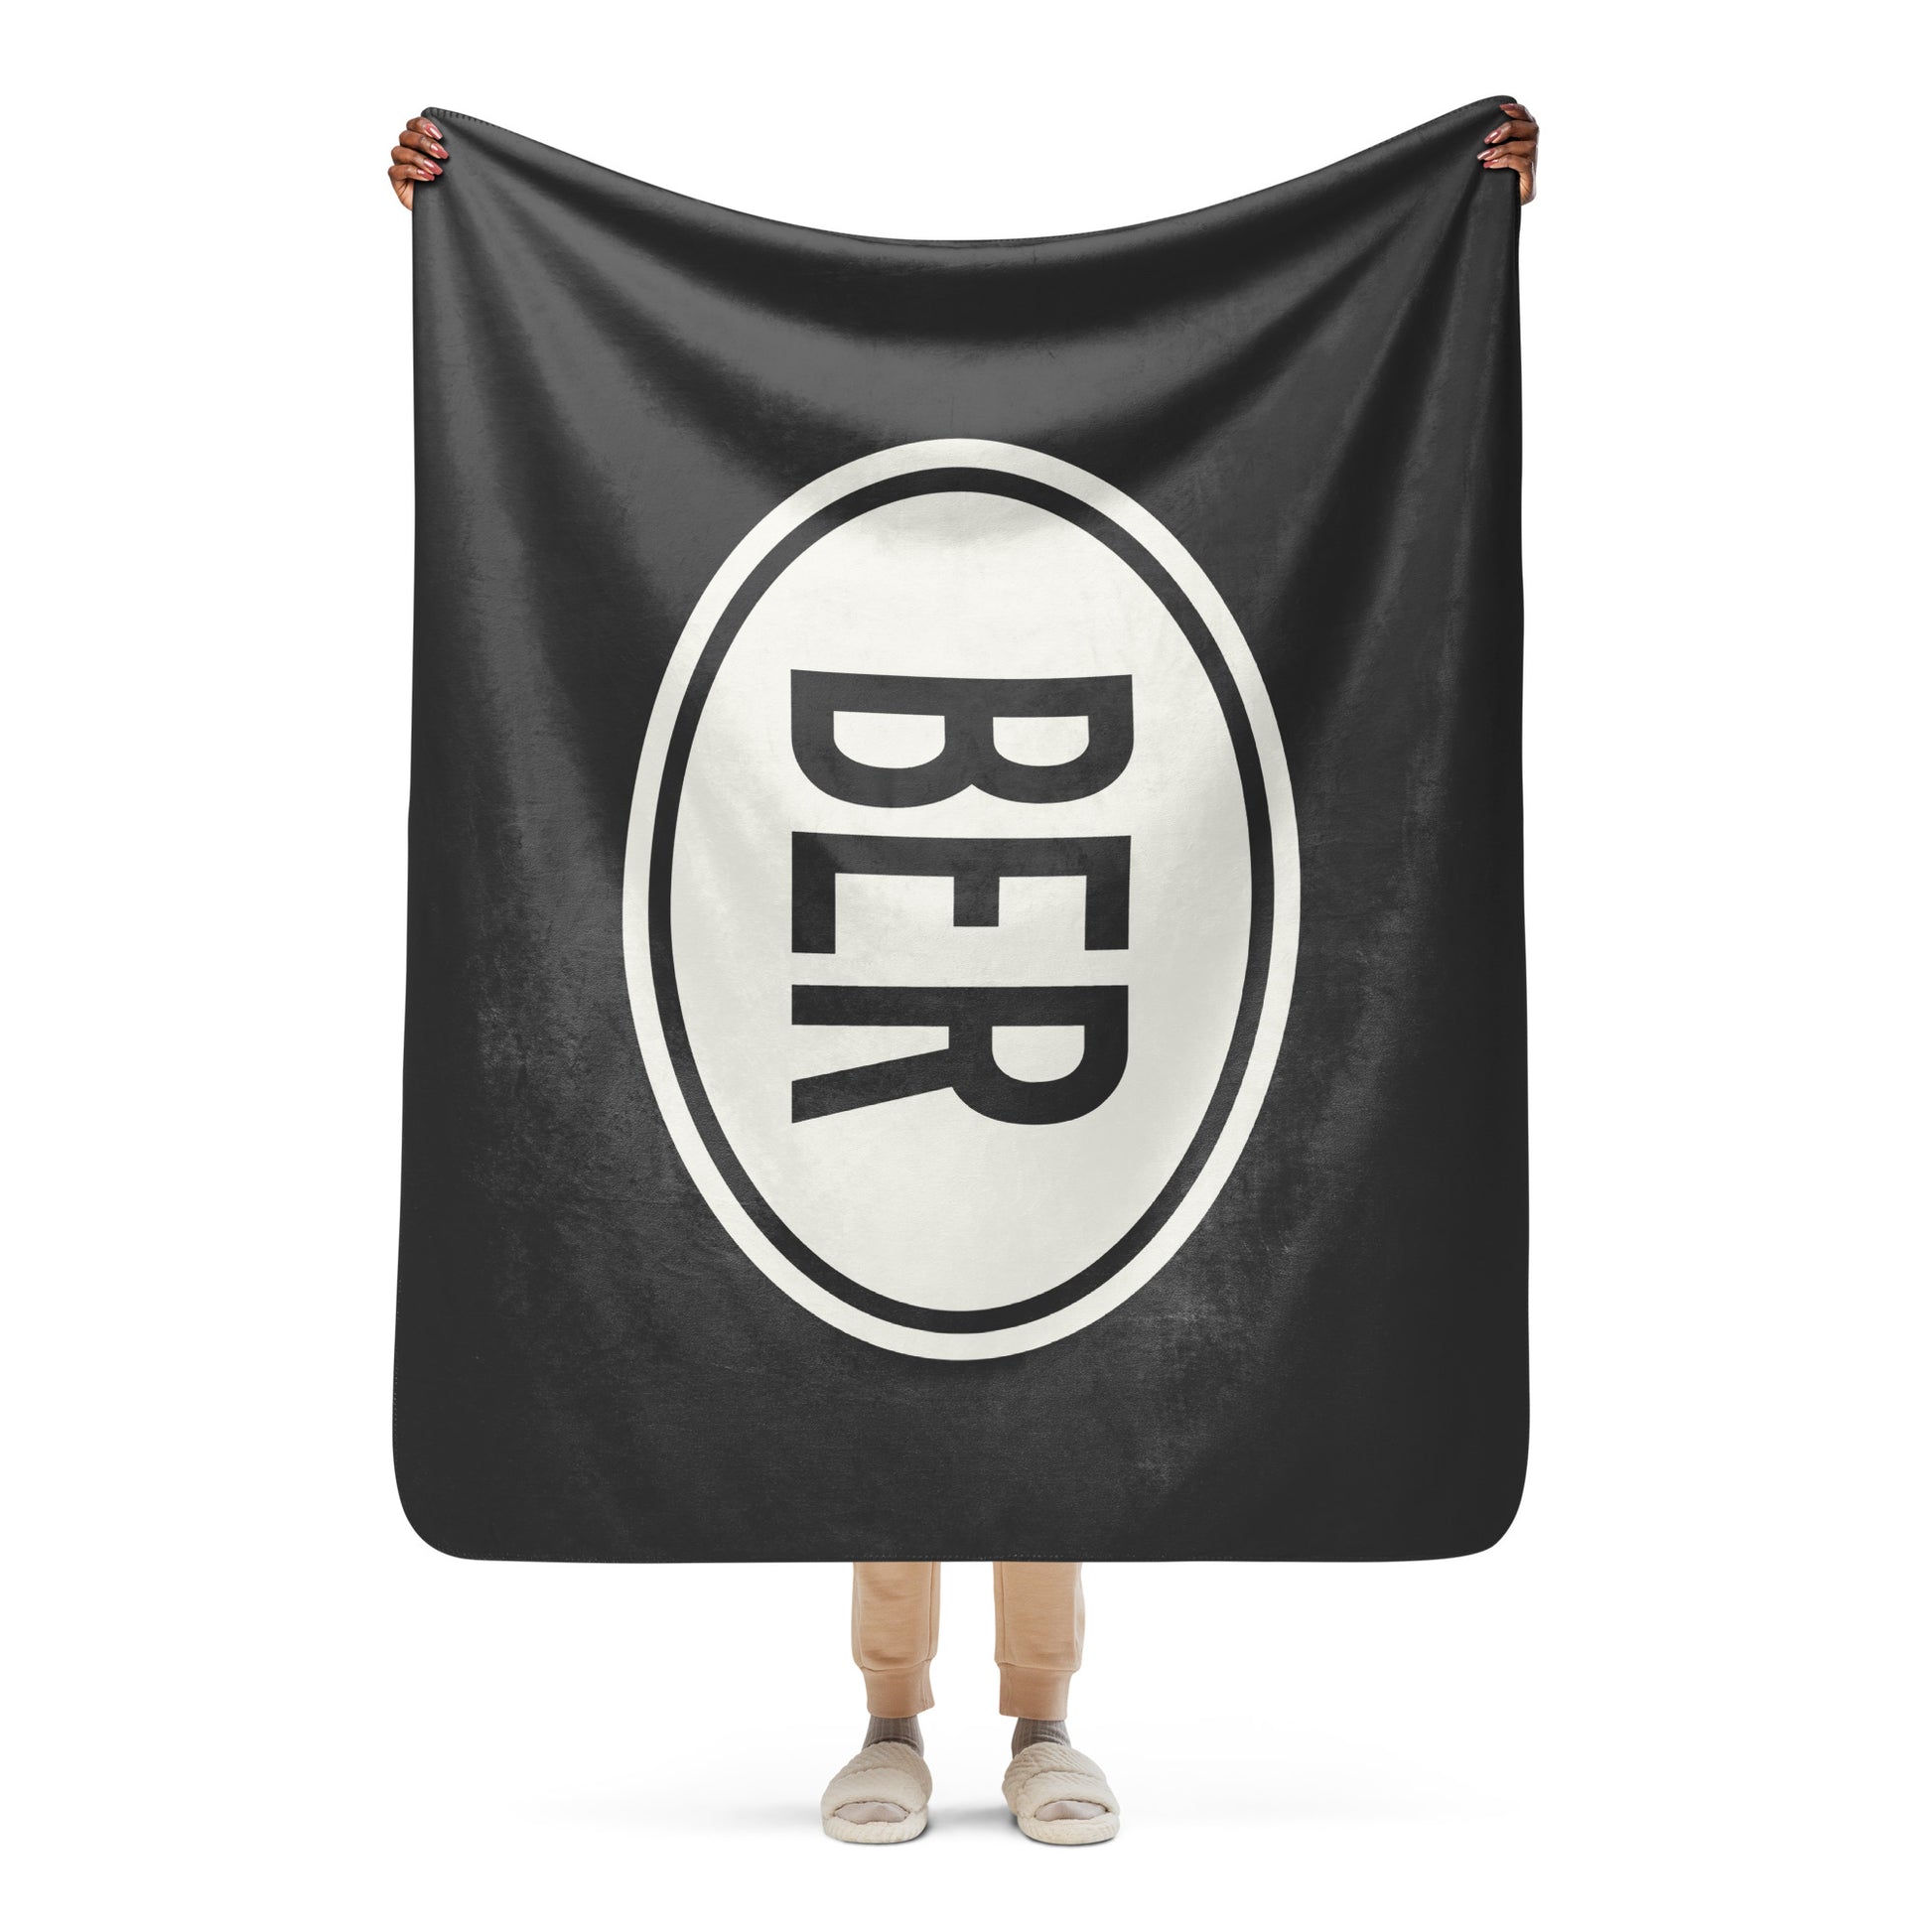 Unique Travel Gift Sherpa Blanket - White Oval • BER Berlin • YHM Designs - Image 04